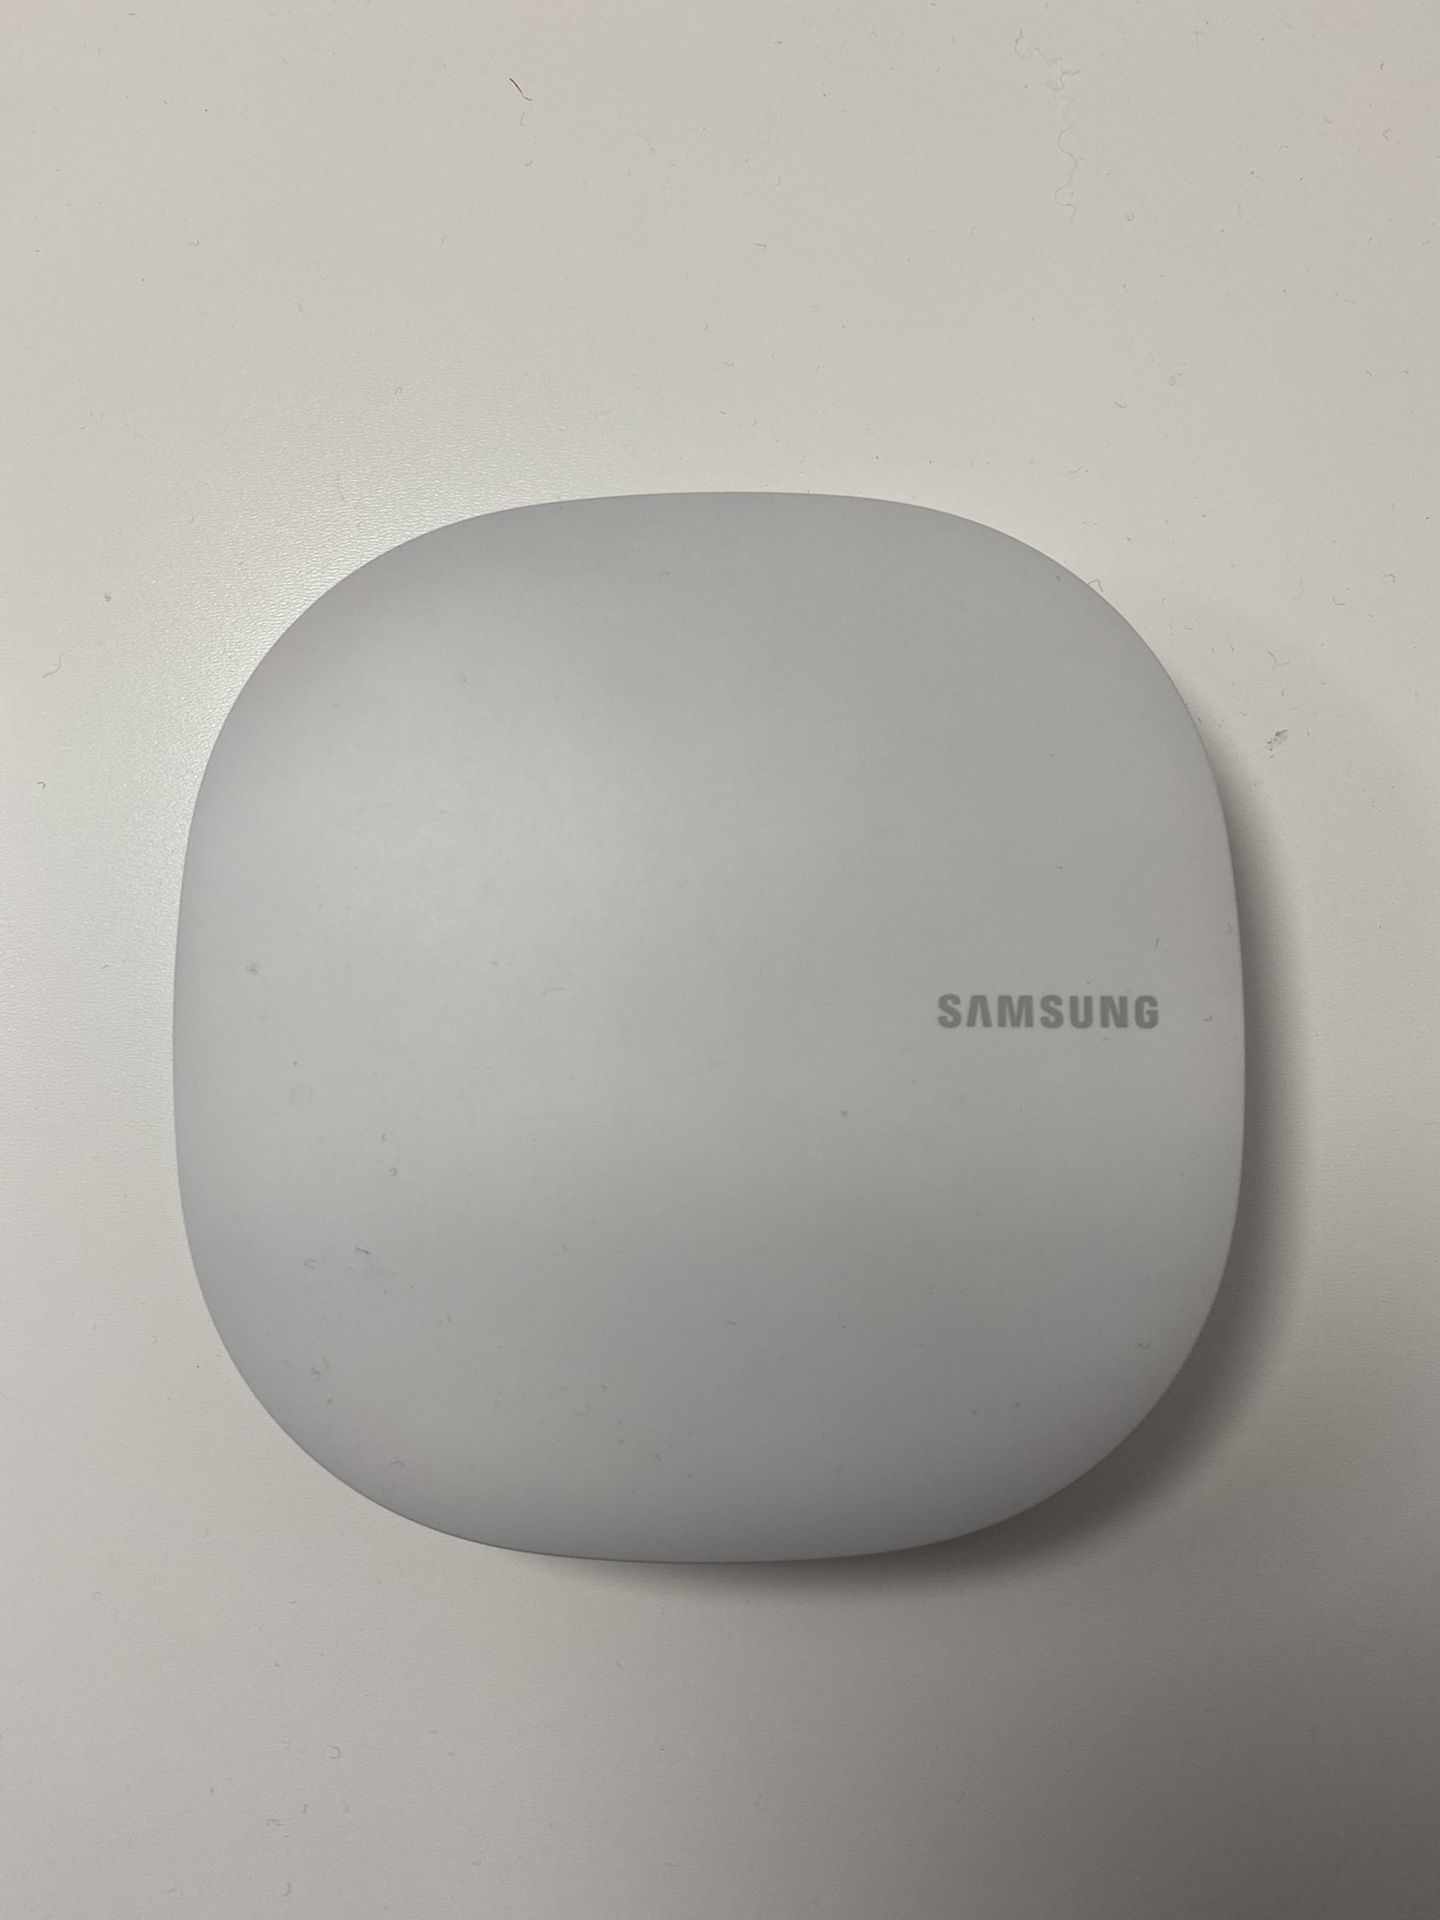 Samsung WiFi AC 1300 Router with Smartthings hub 2 in 1